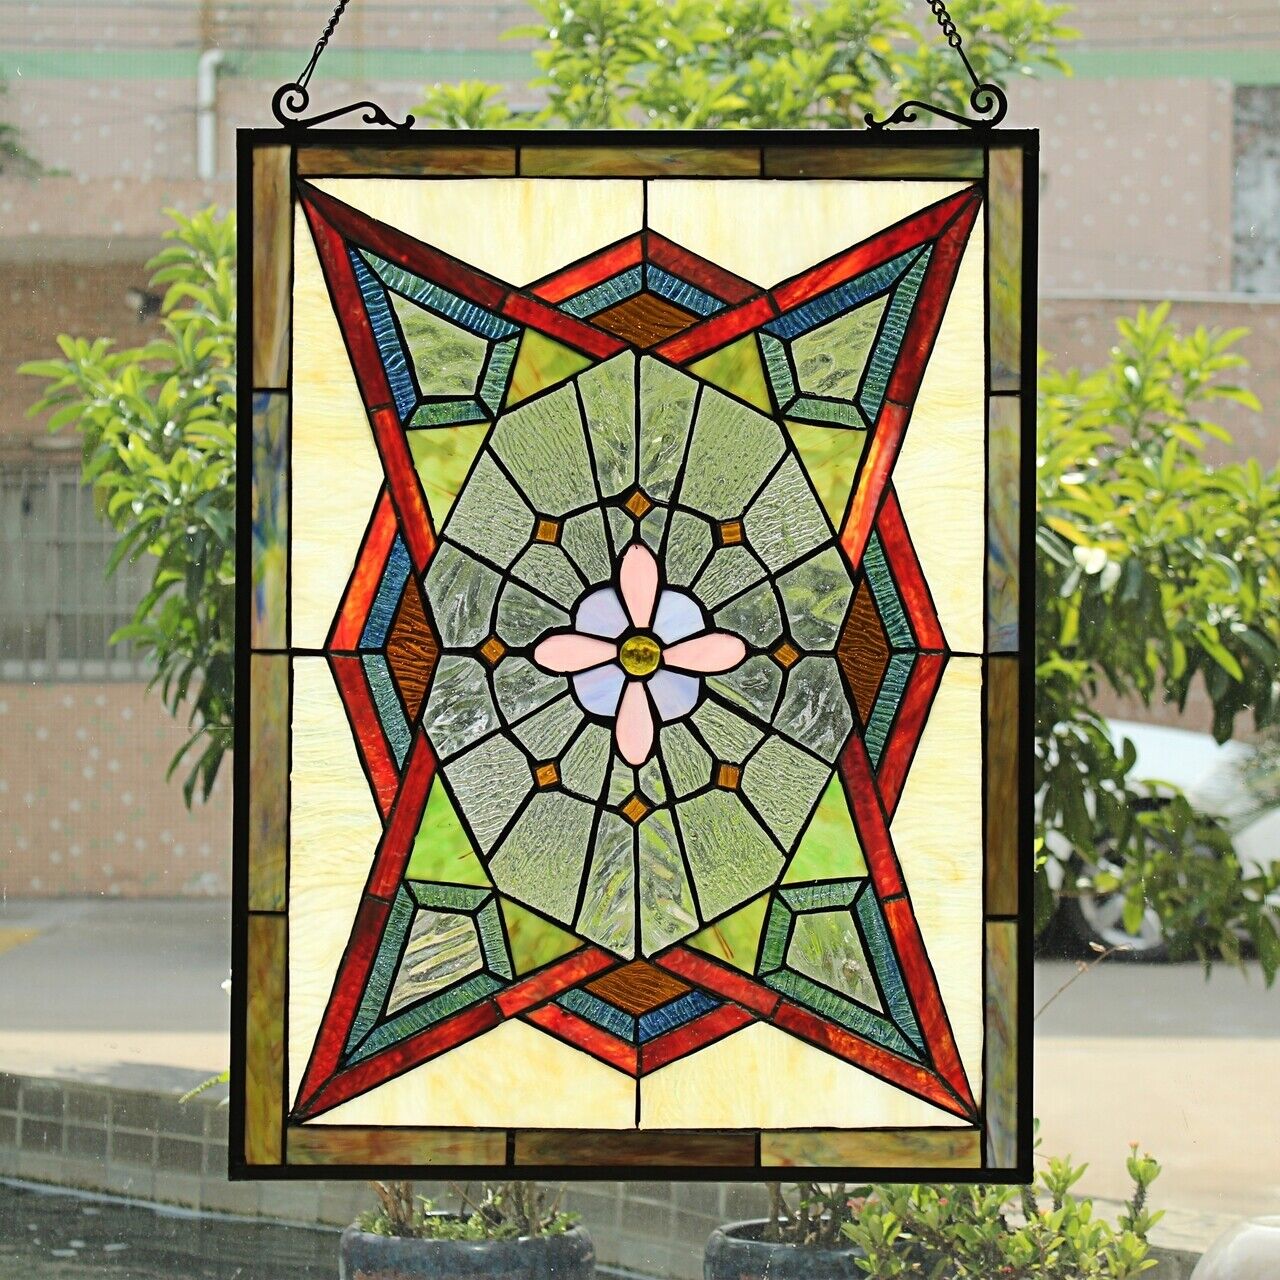 25" Antique Style Stained Glass Window Hanging Panel Suncatcher